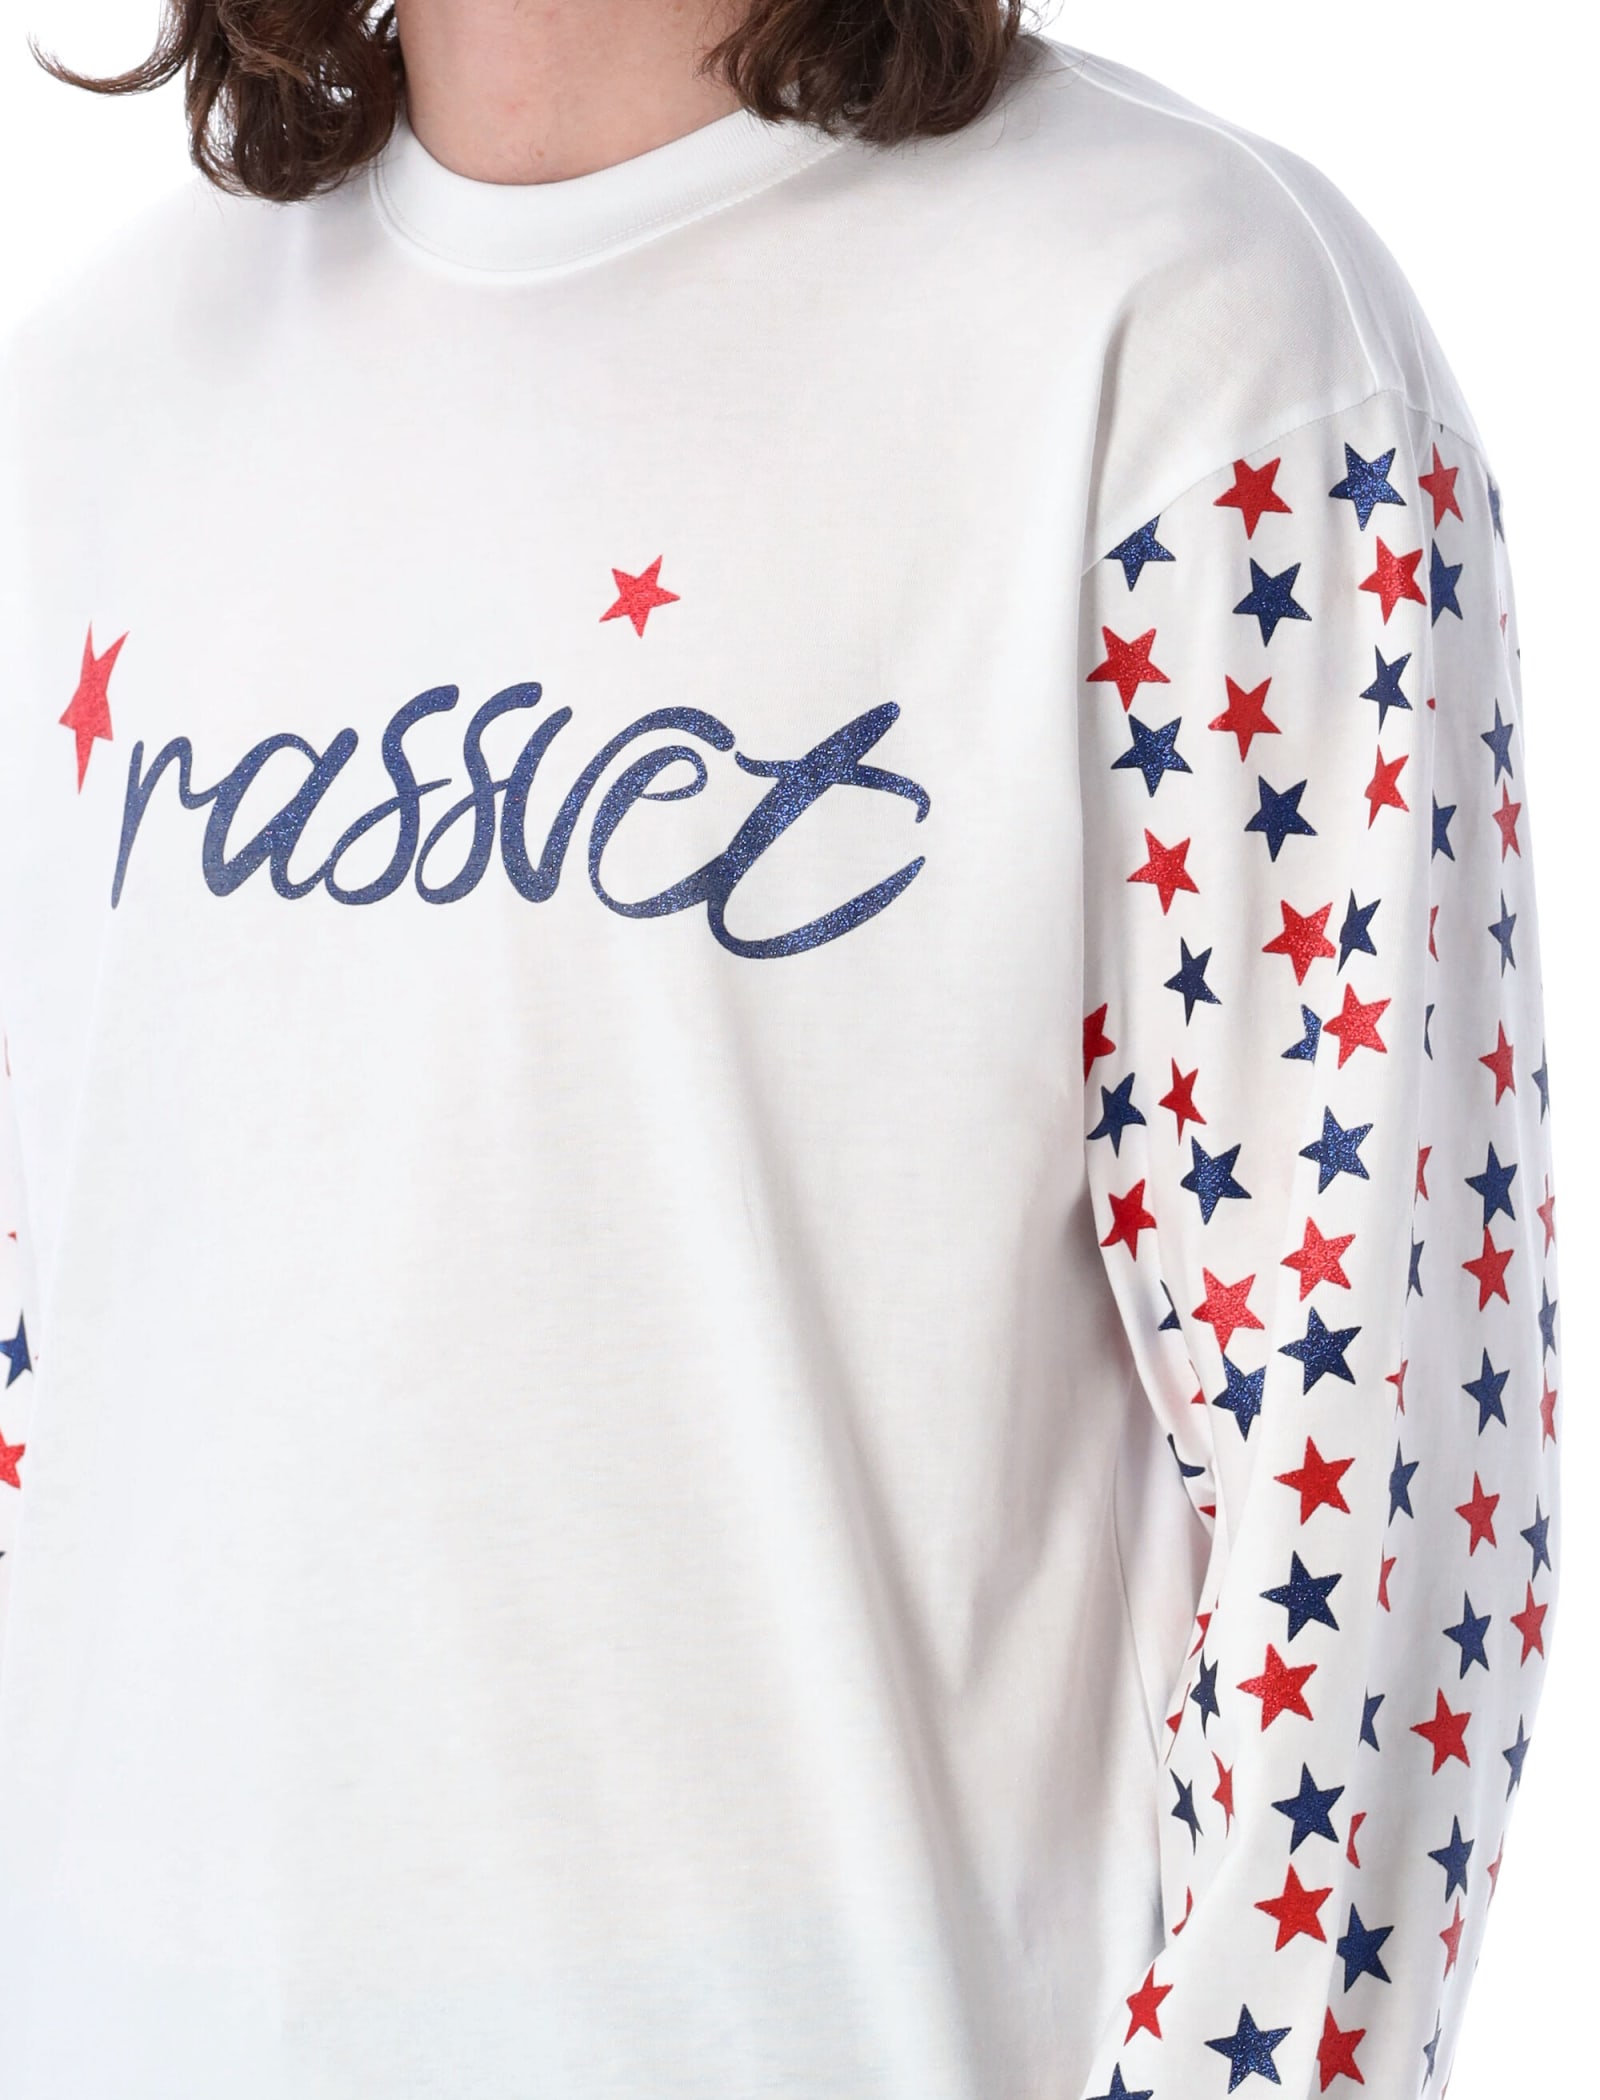 Shop Paccbet Free To Sparkle L/s T-shirt In White